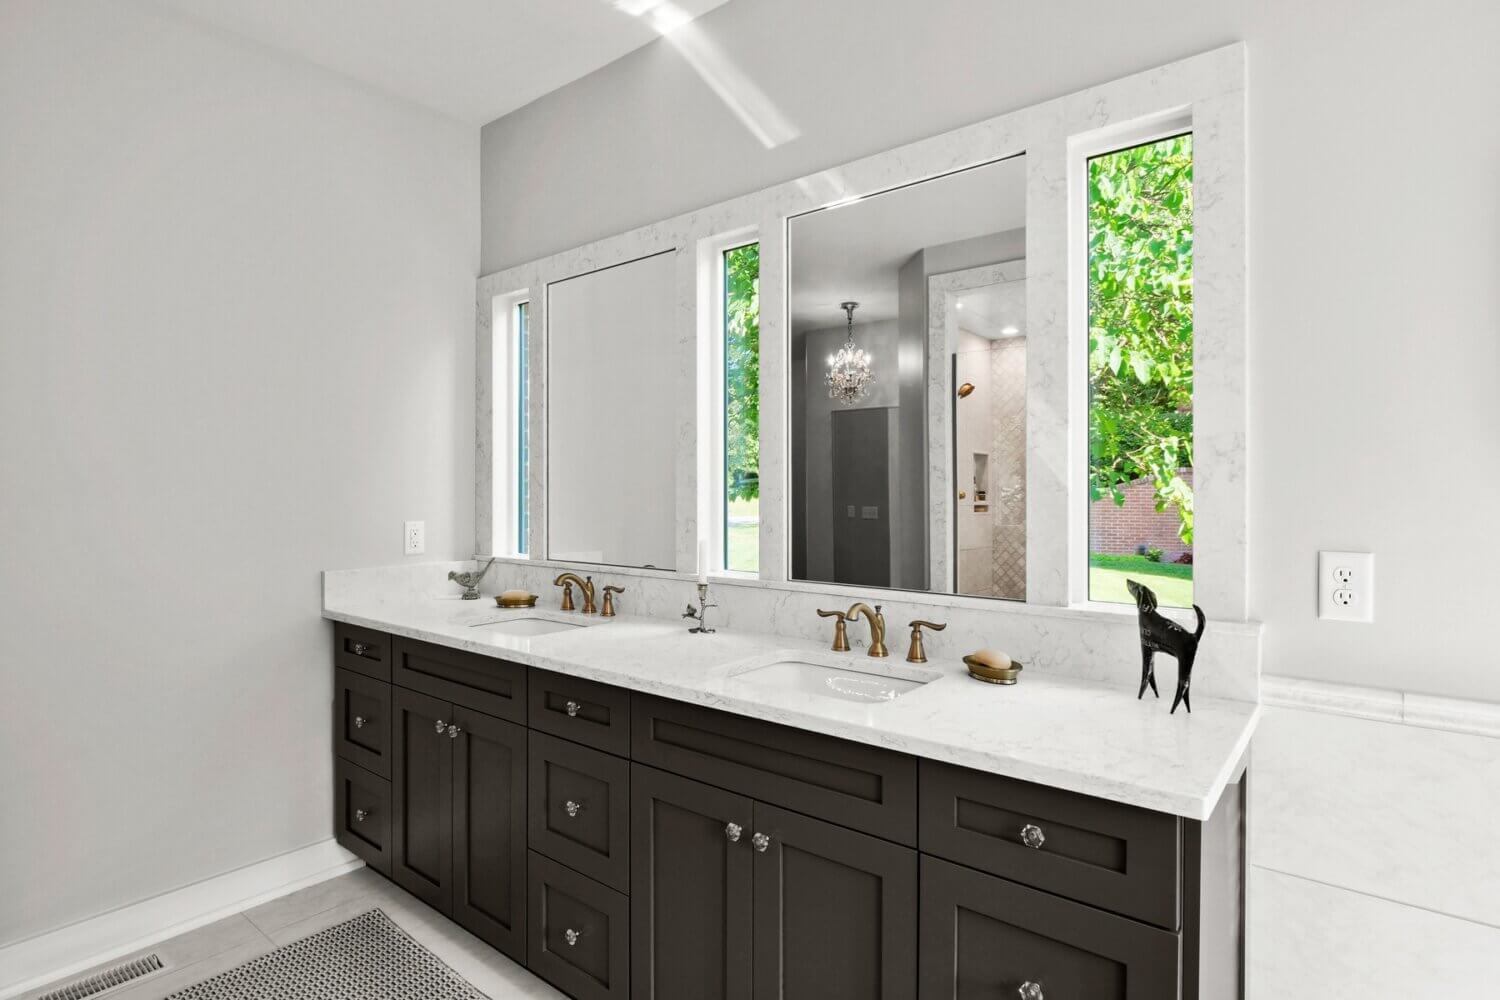 This black and white master bathroom has natural light pooling through the windows behind the vanity mirrors and a dark gray painted vanity.